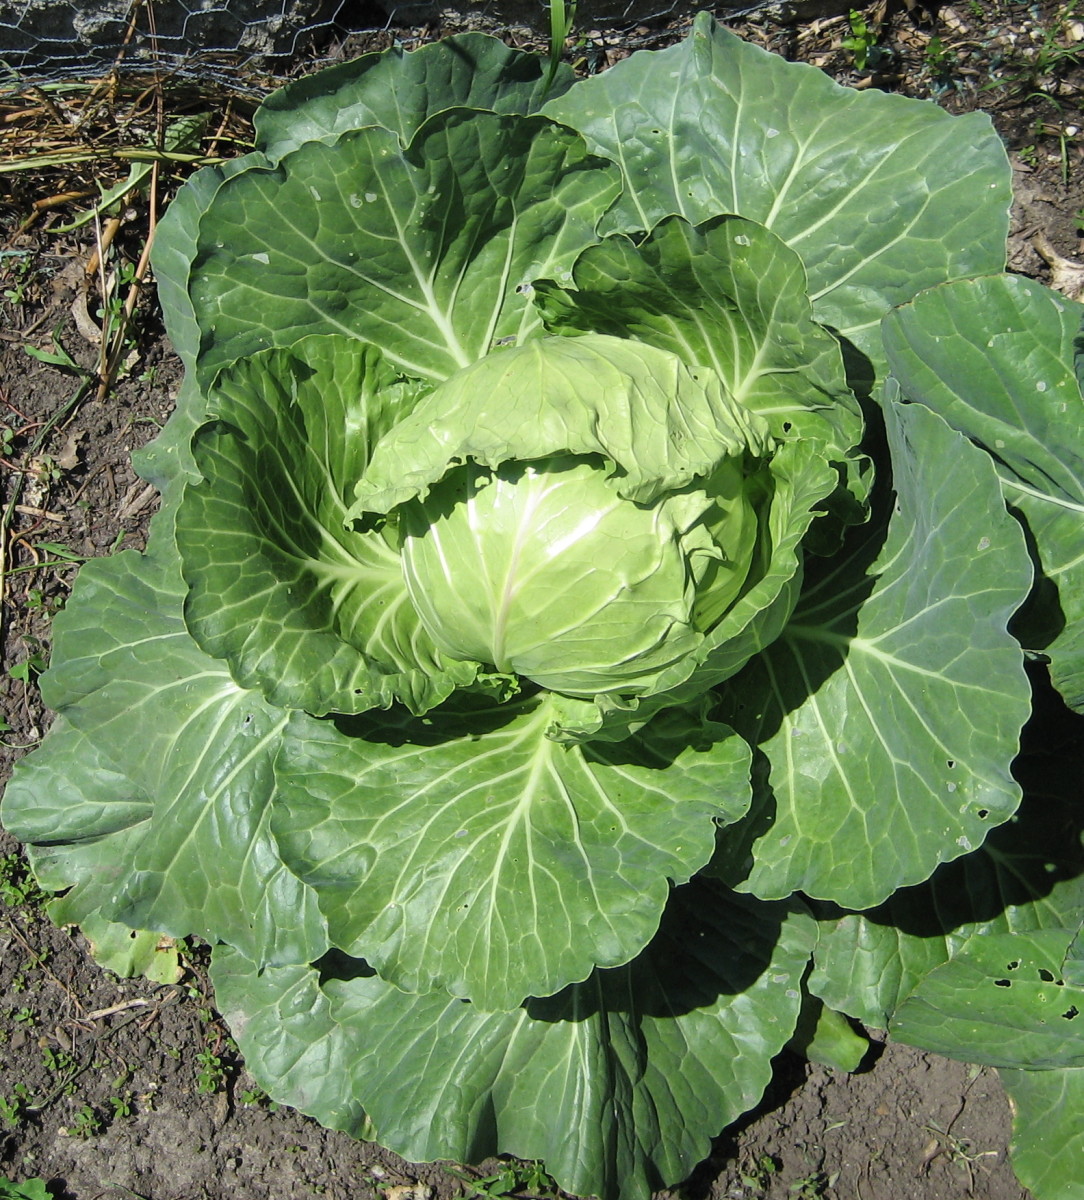 Spotlight on the Cabbage: History, Health Benefits, and Recipes